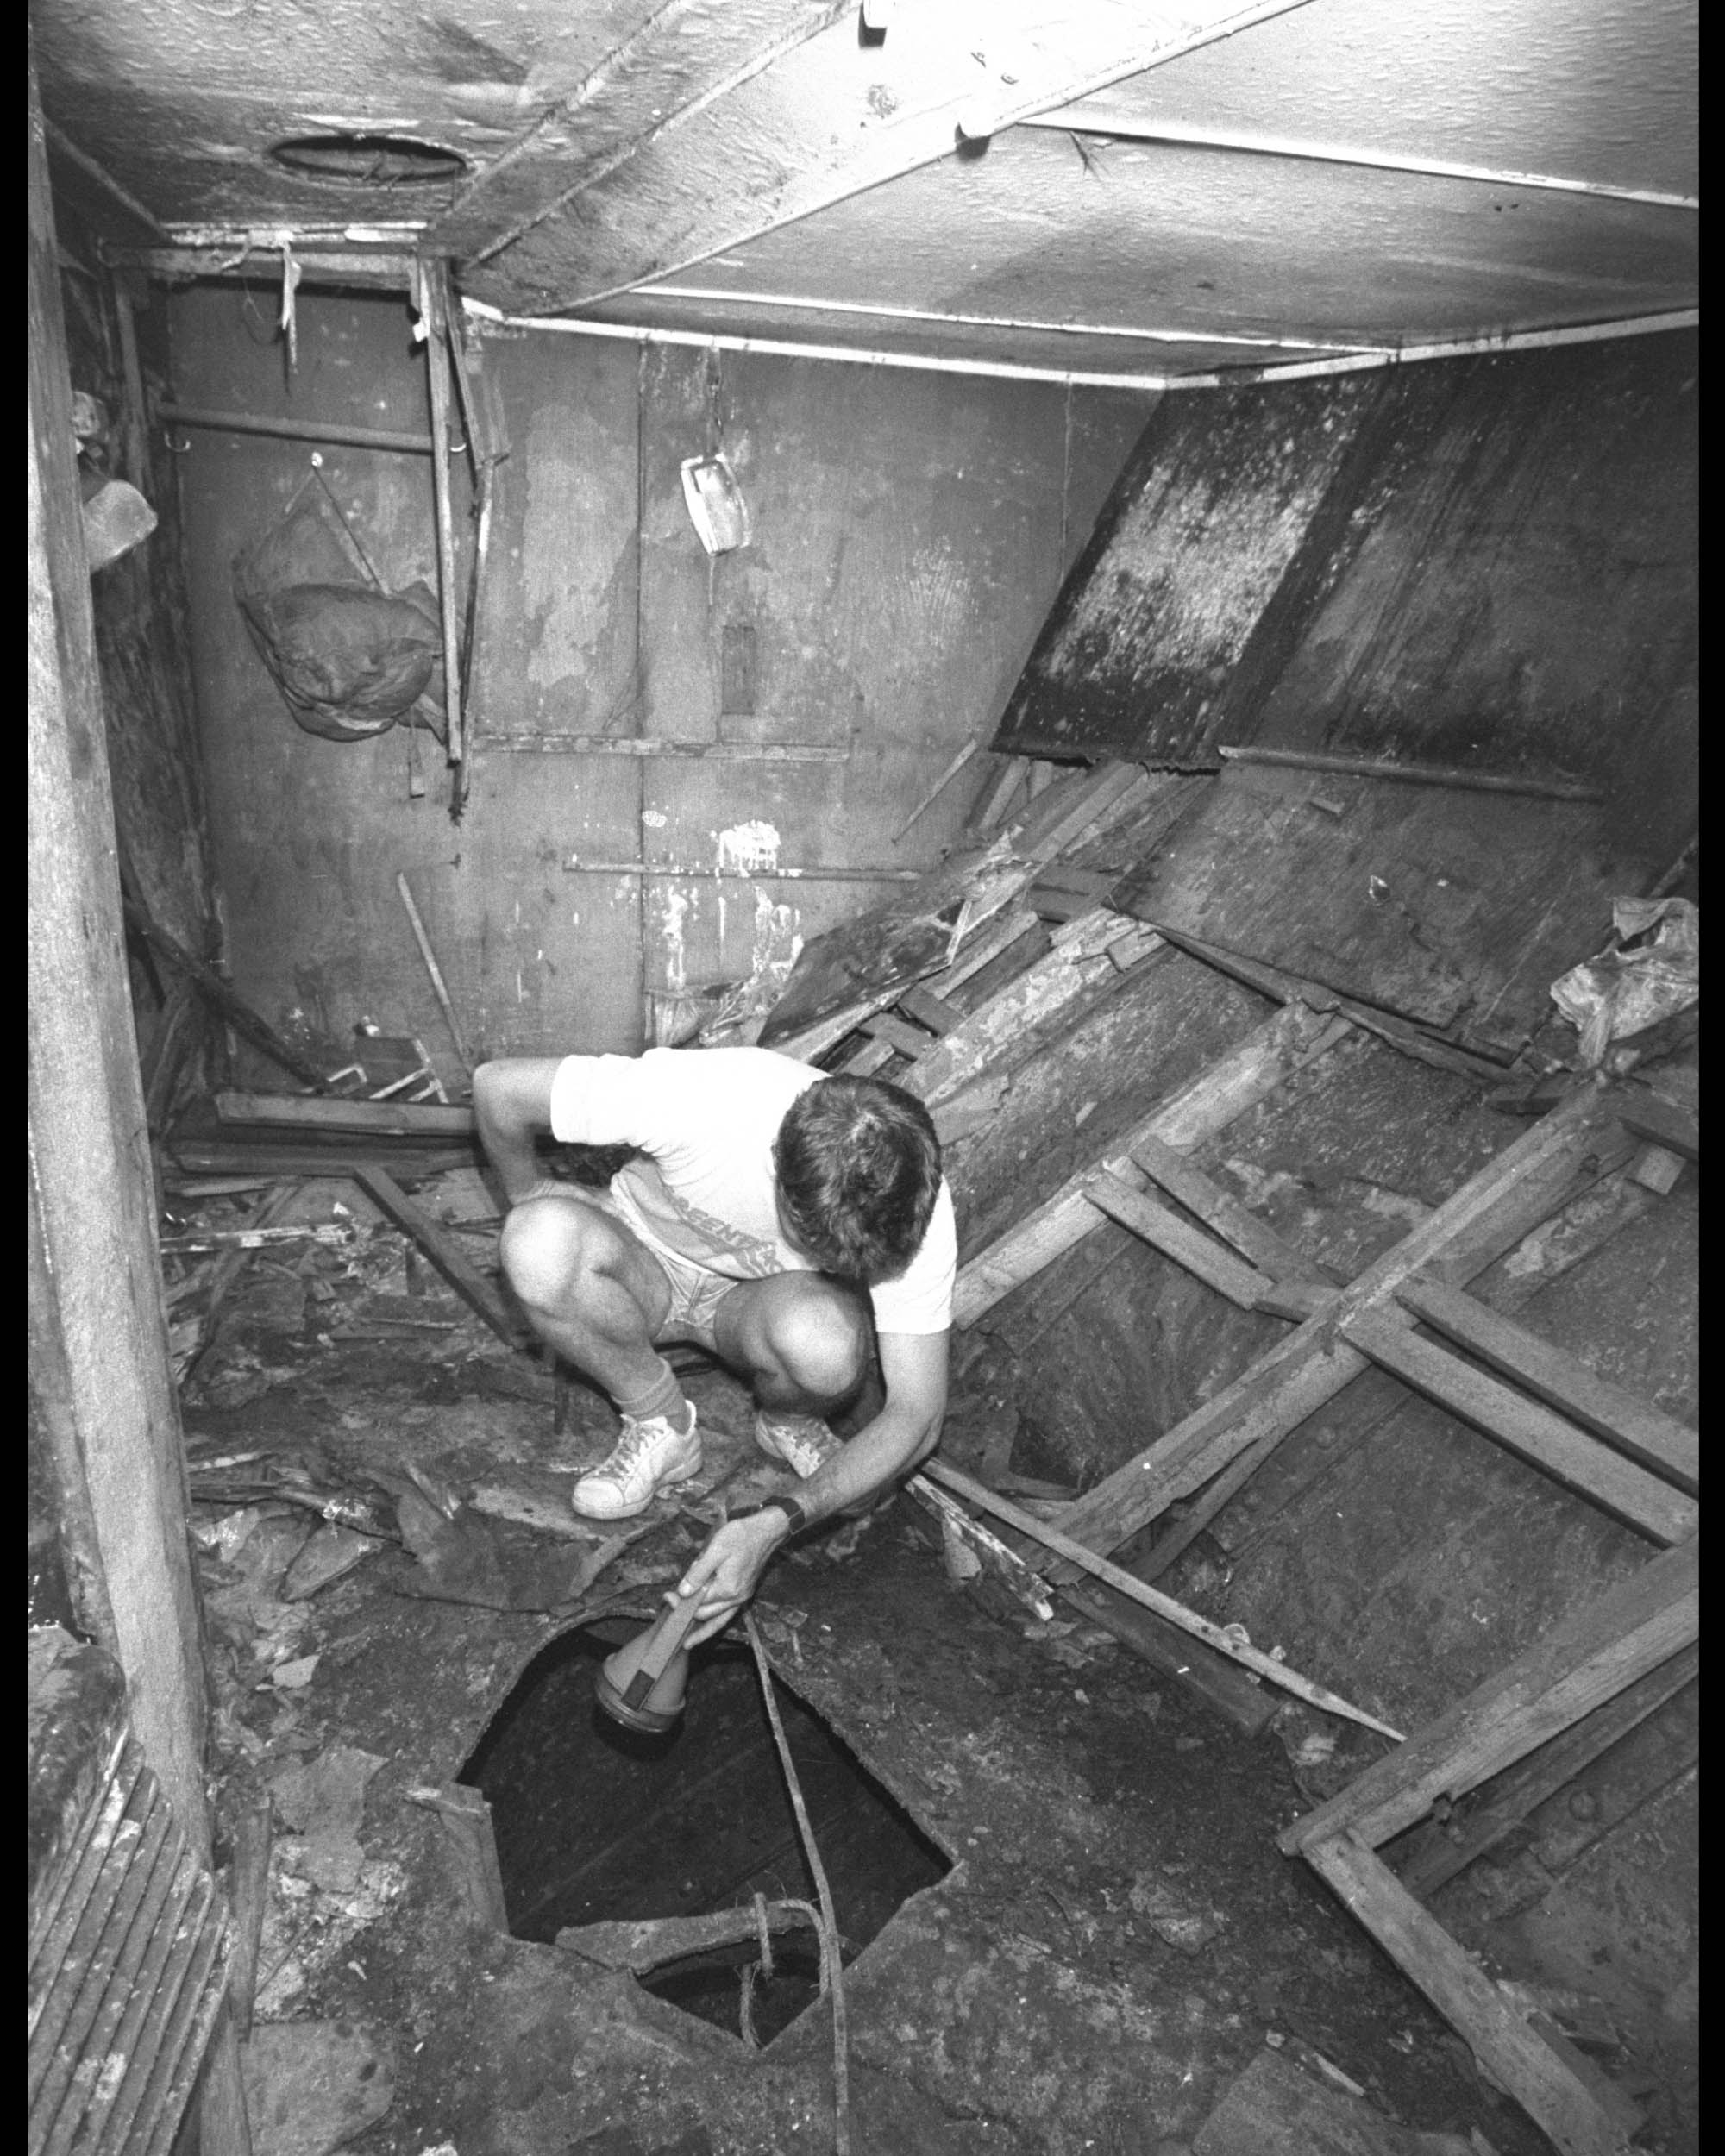 Inspecting the damage to the Rainbow Warrior after the bombing.  Image courtesy of Greenpeace.